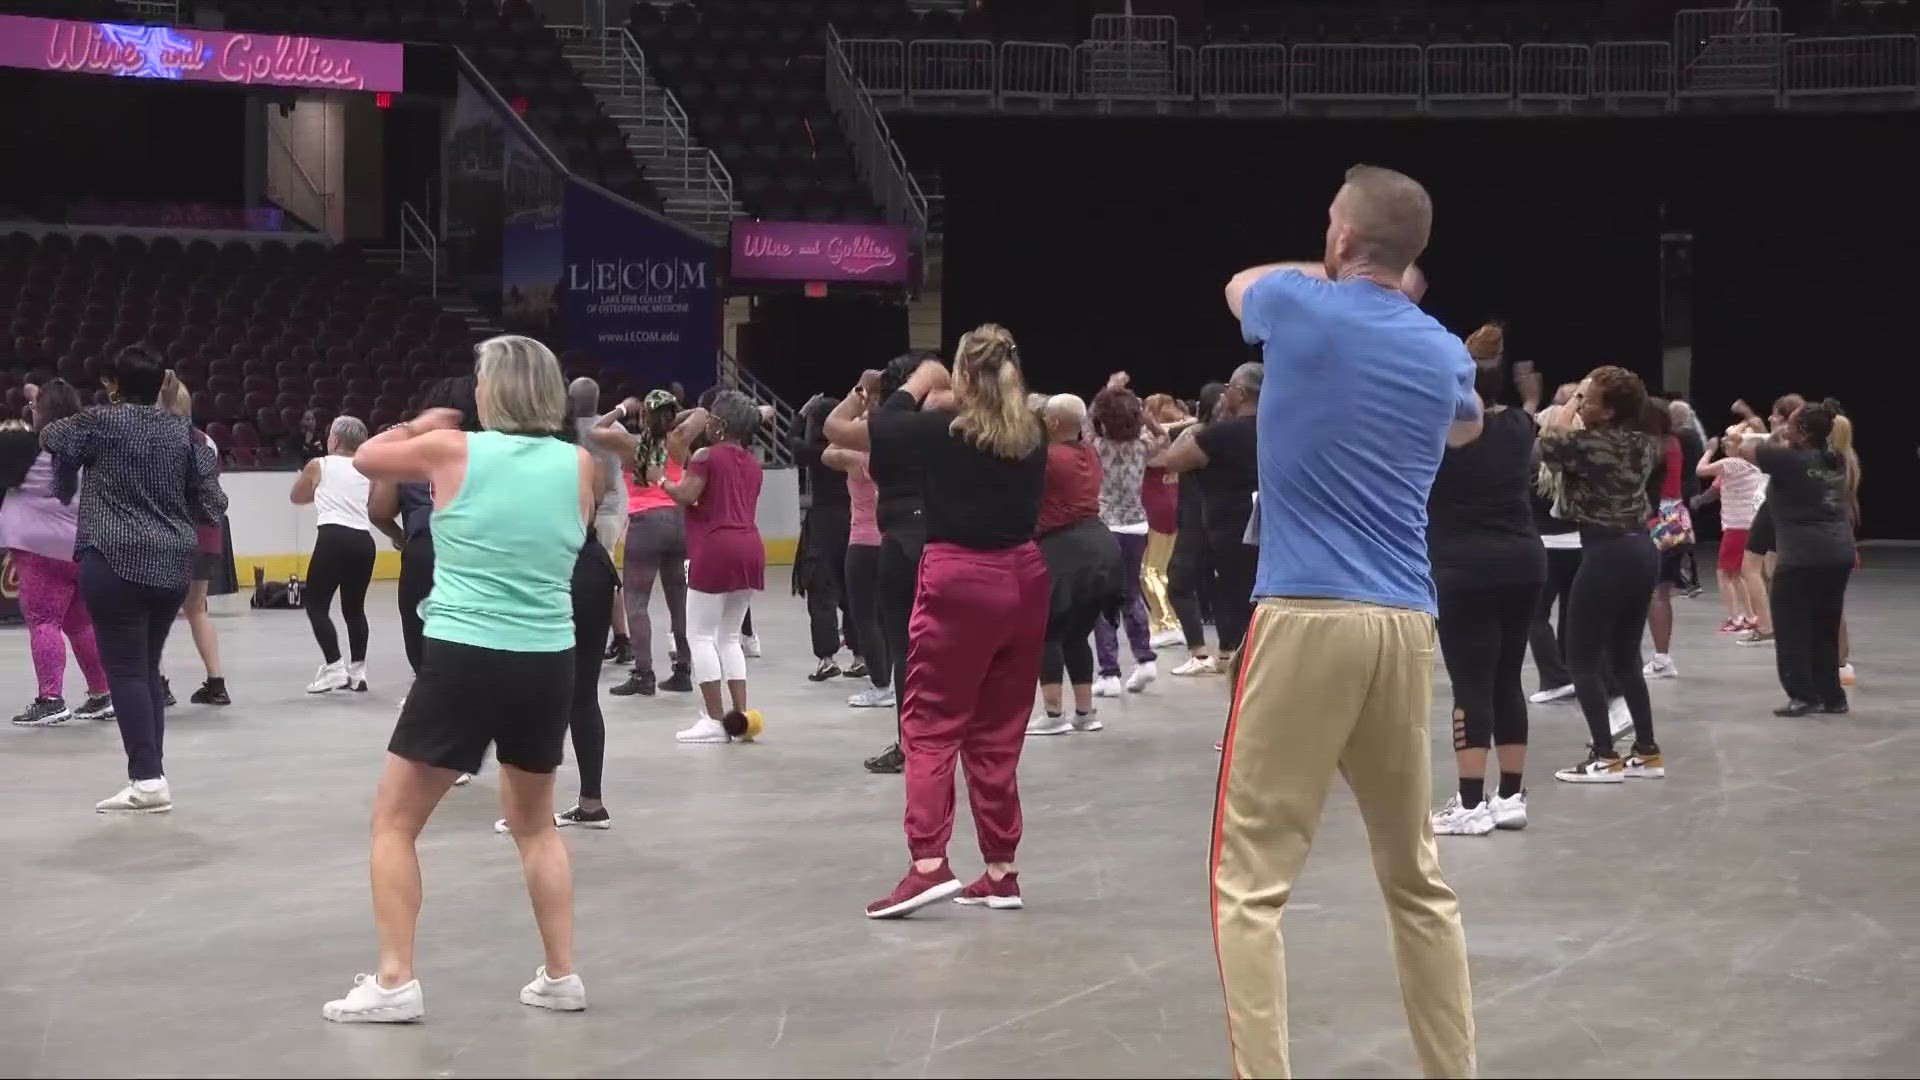 The Cleveland Cavaliers' energetic dance crew is comprised of local seniors who still have the moves!